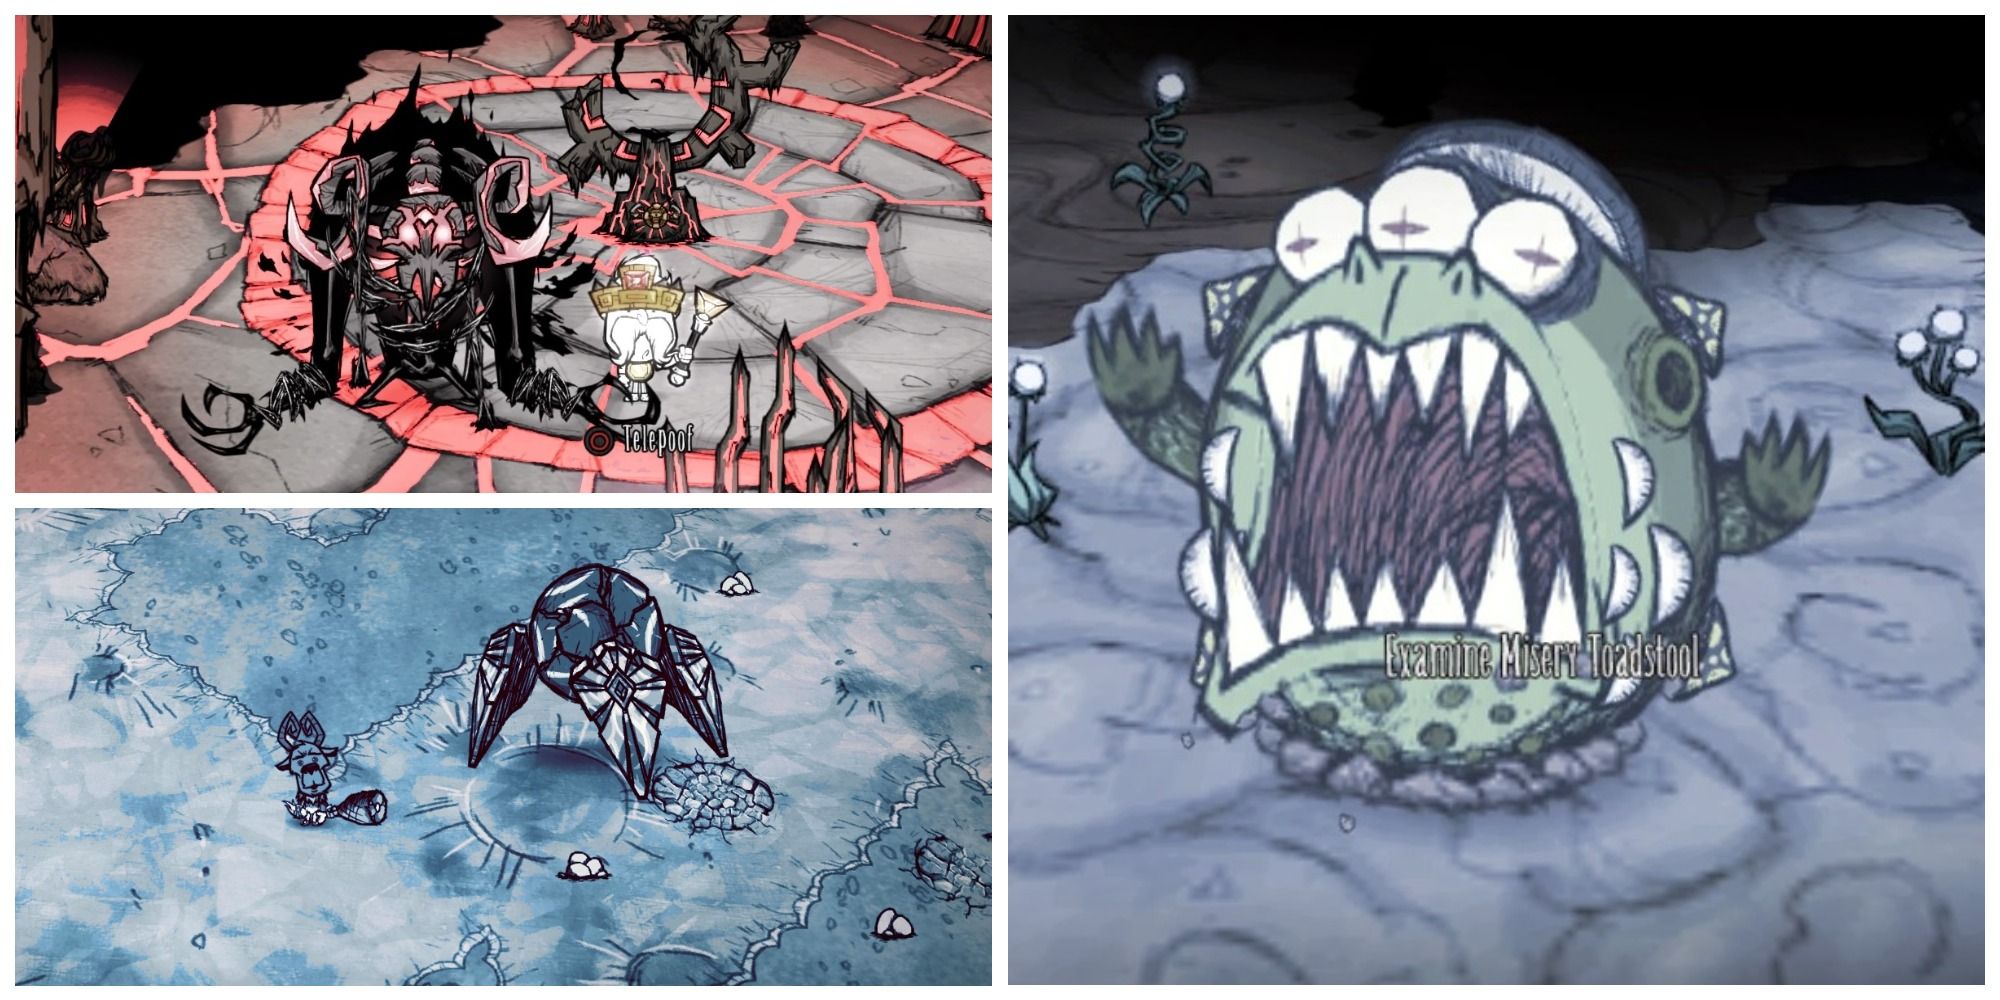 Don't Starve Together: Terraria Bosses will spawn wherever you are